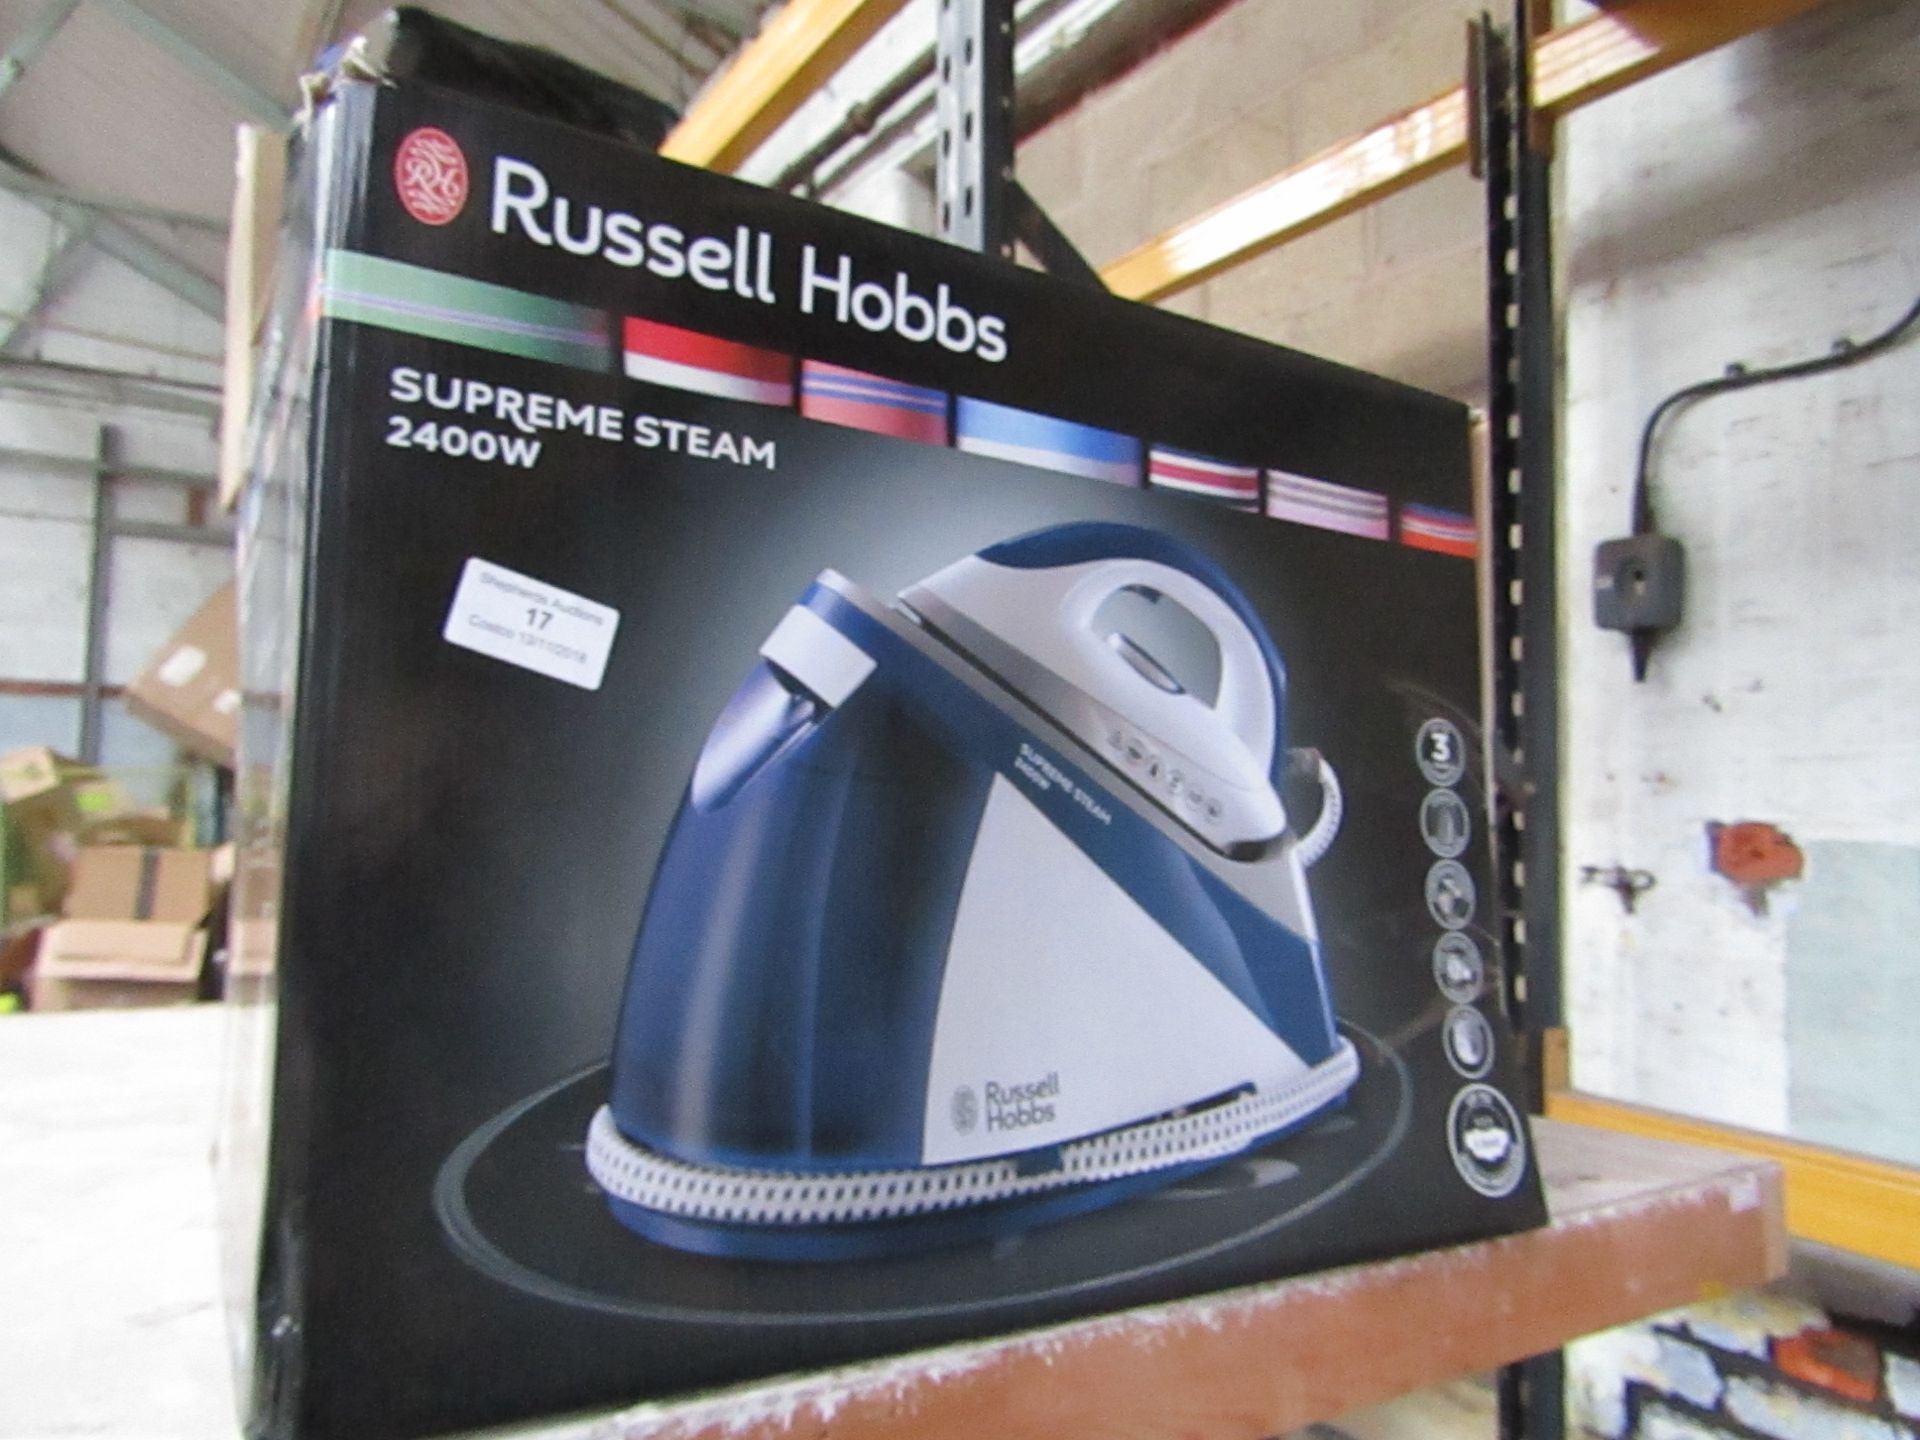 Russell Hobbs Steam Supreme steam generator iron, powers on and boxed